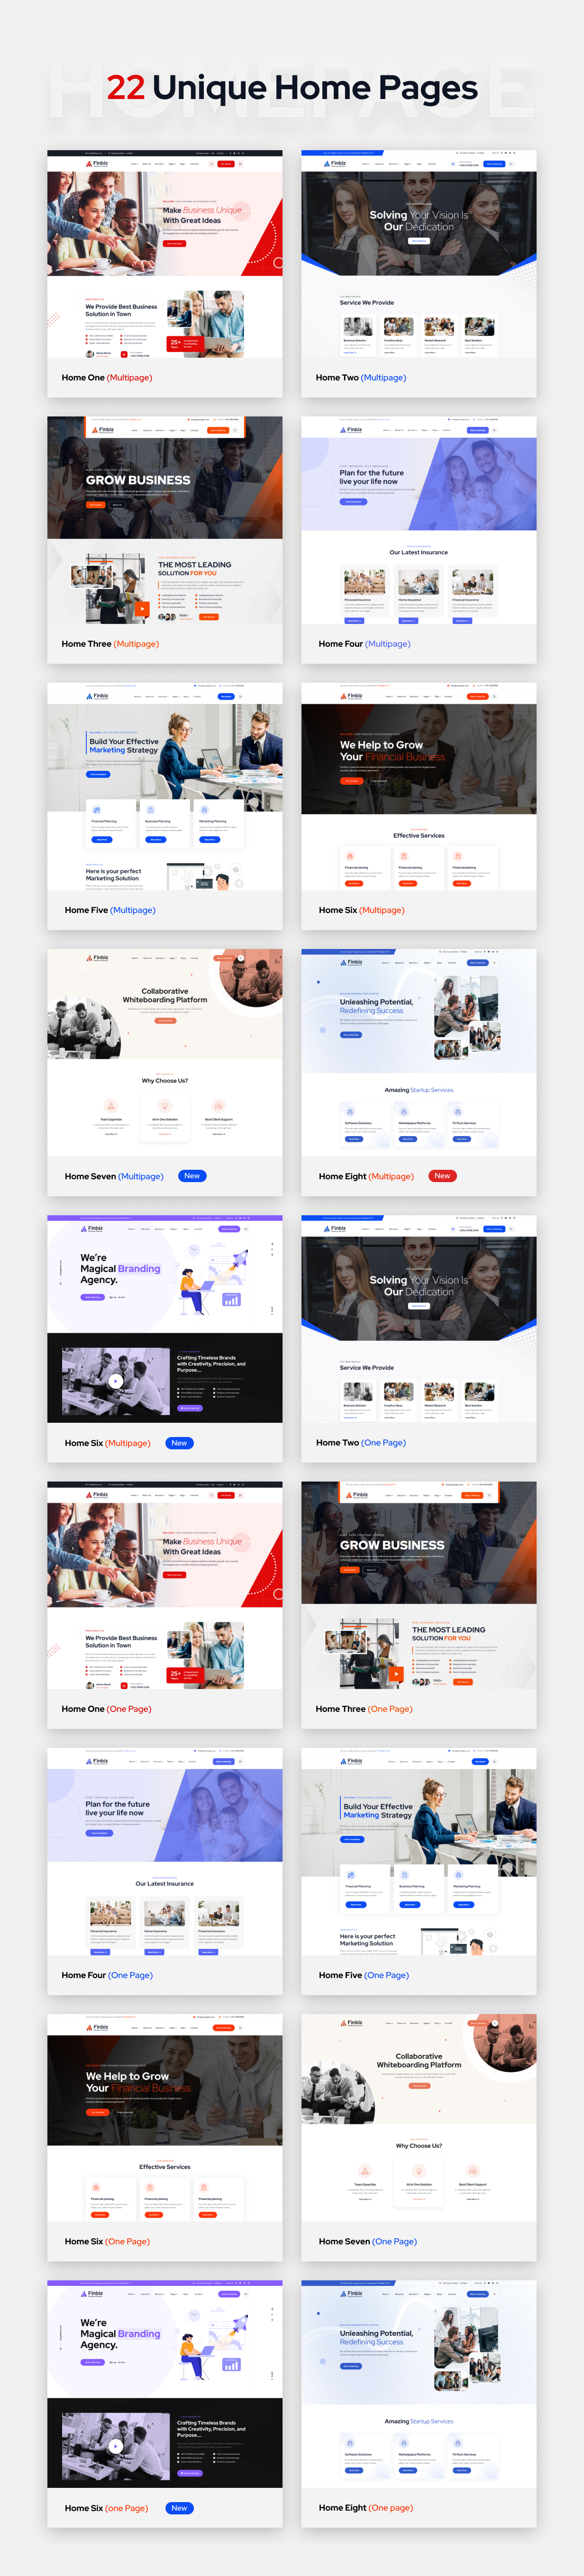 Finbiz - PHP Consulting Business Template - 2